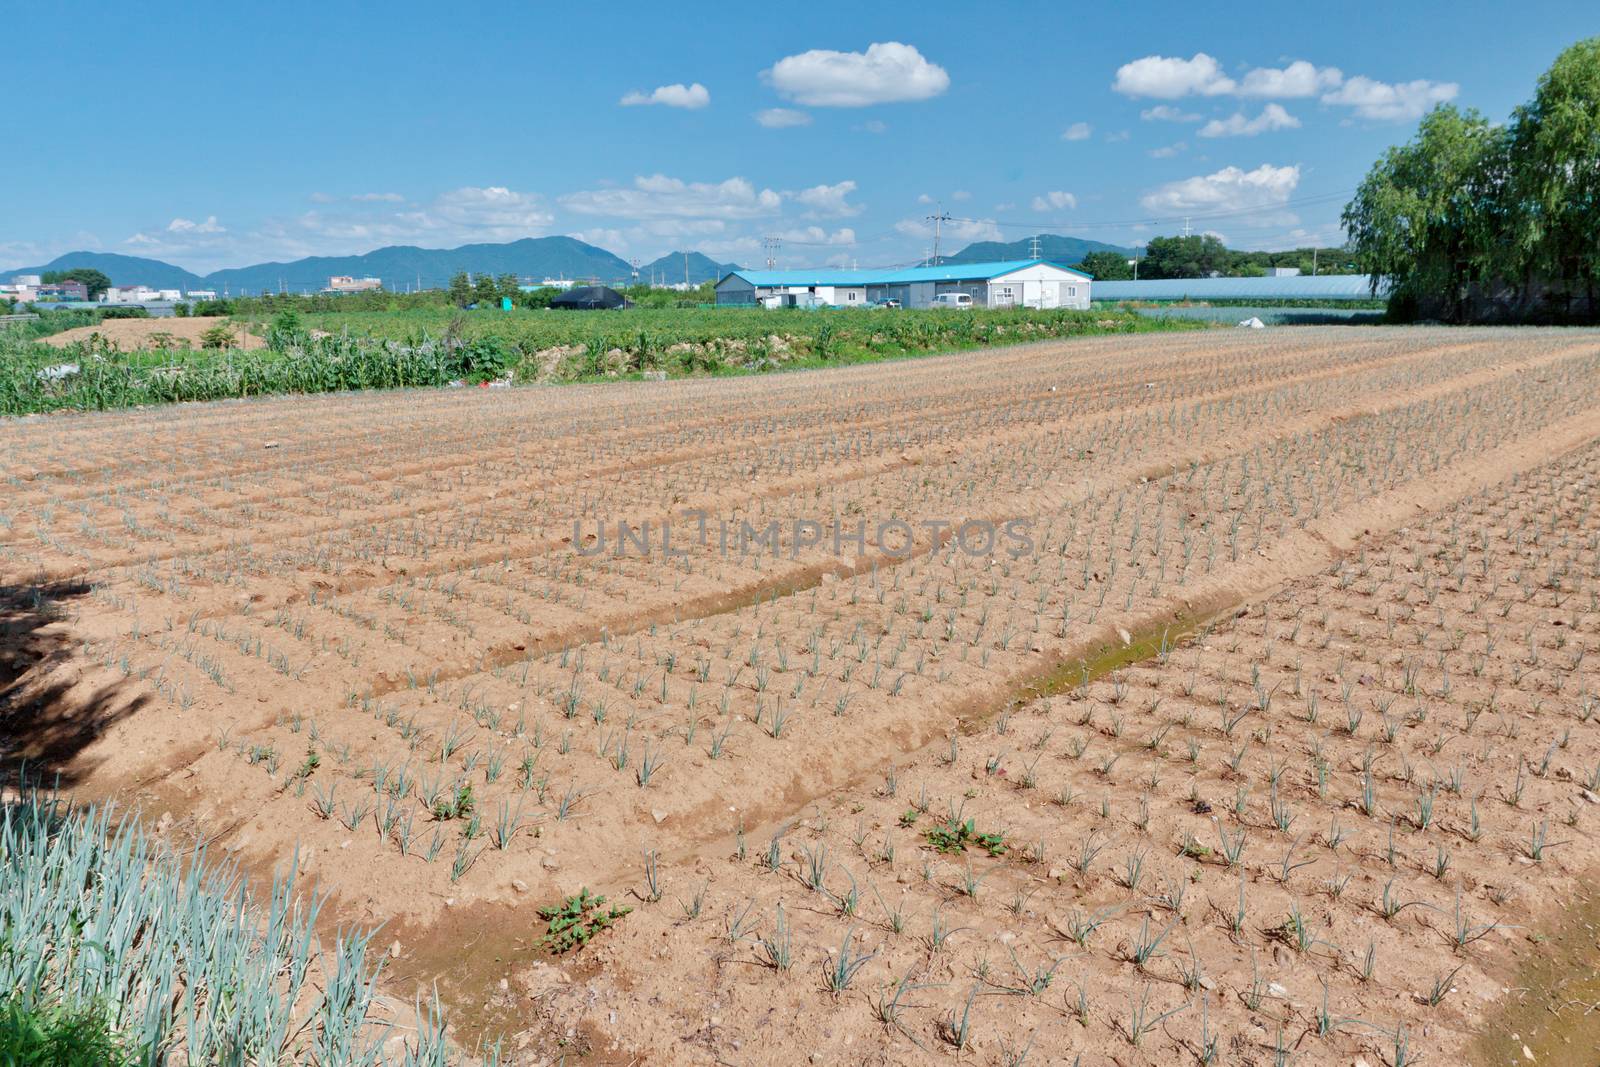 Growing green onion beds in the field in Korean countryside in a sunny day